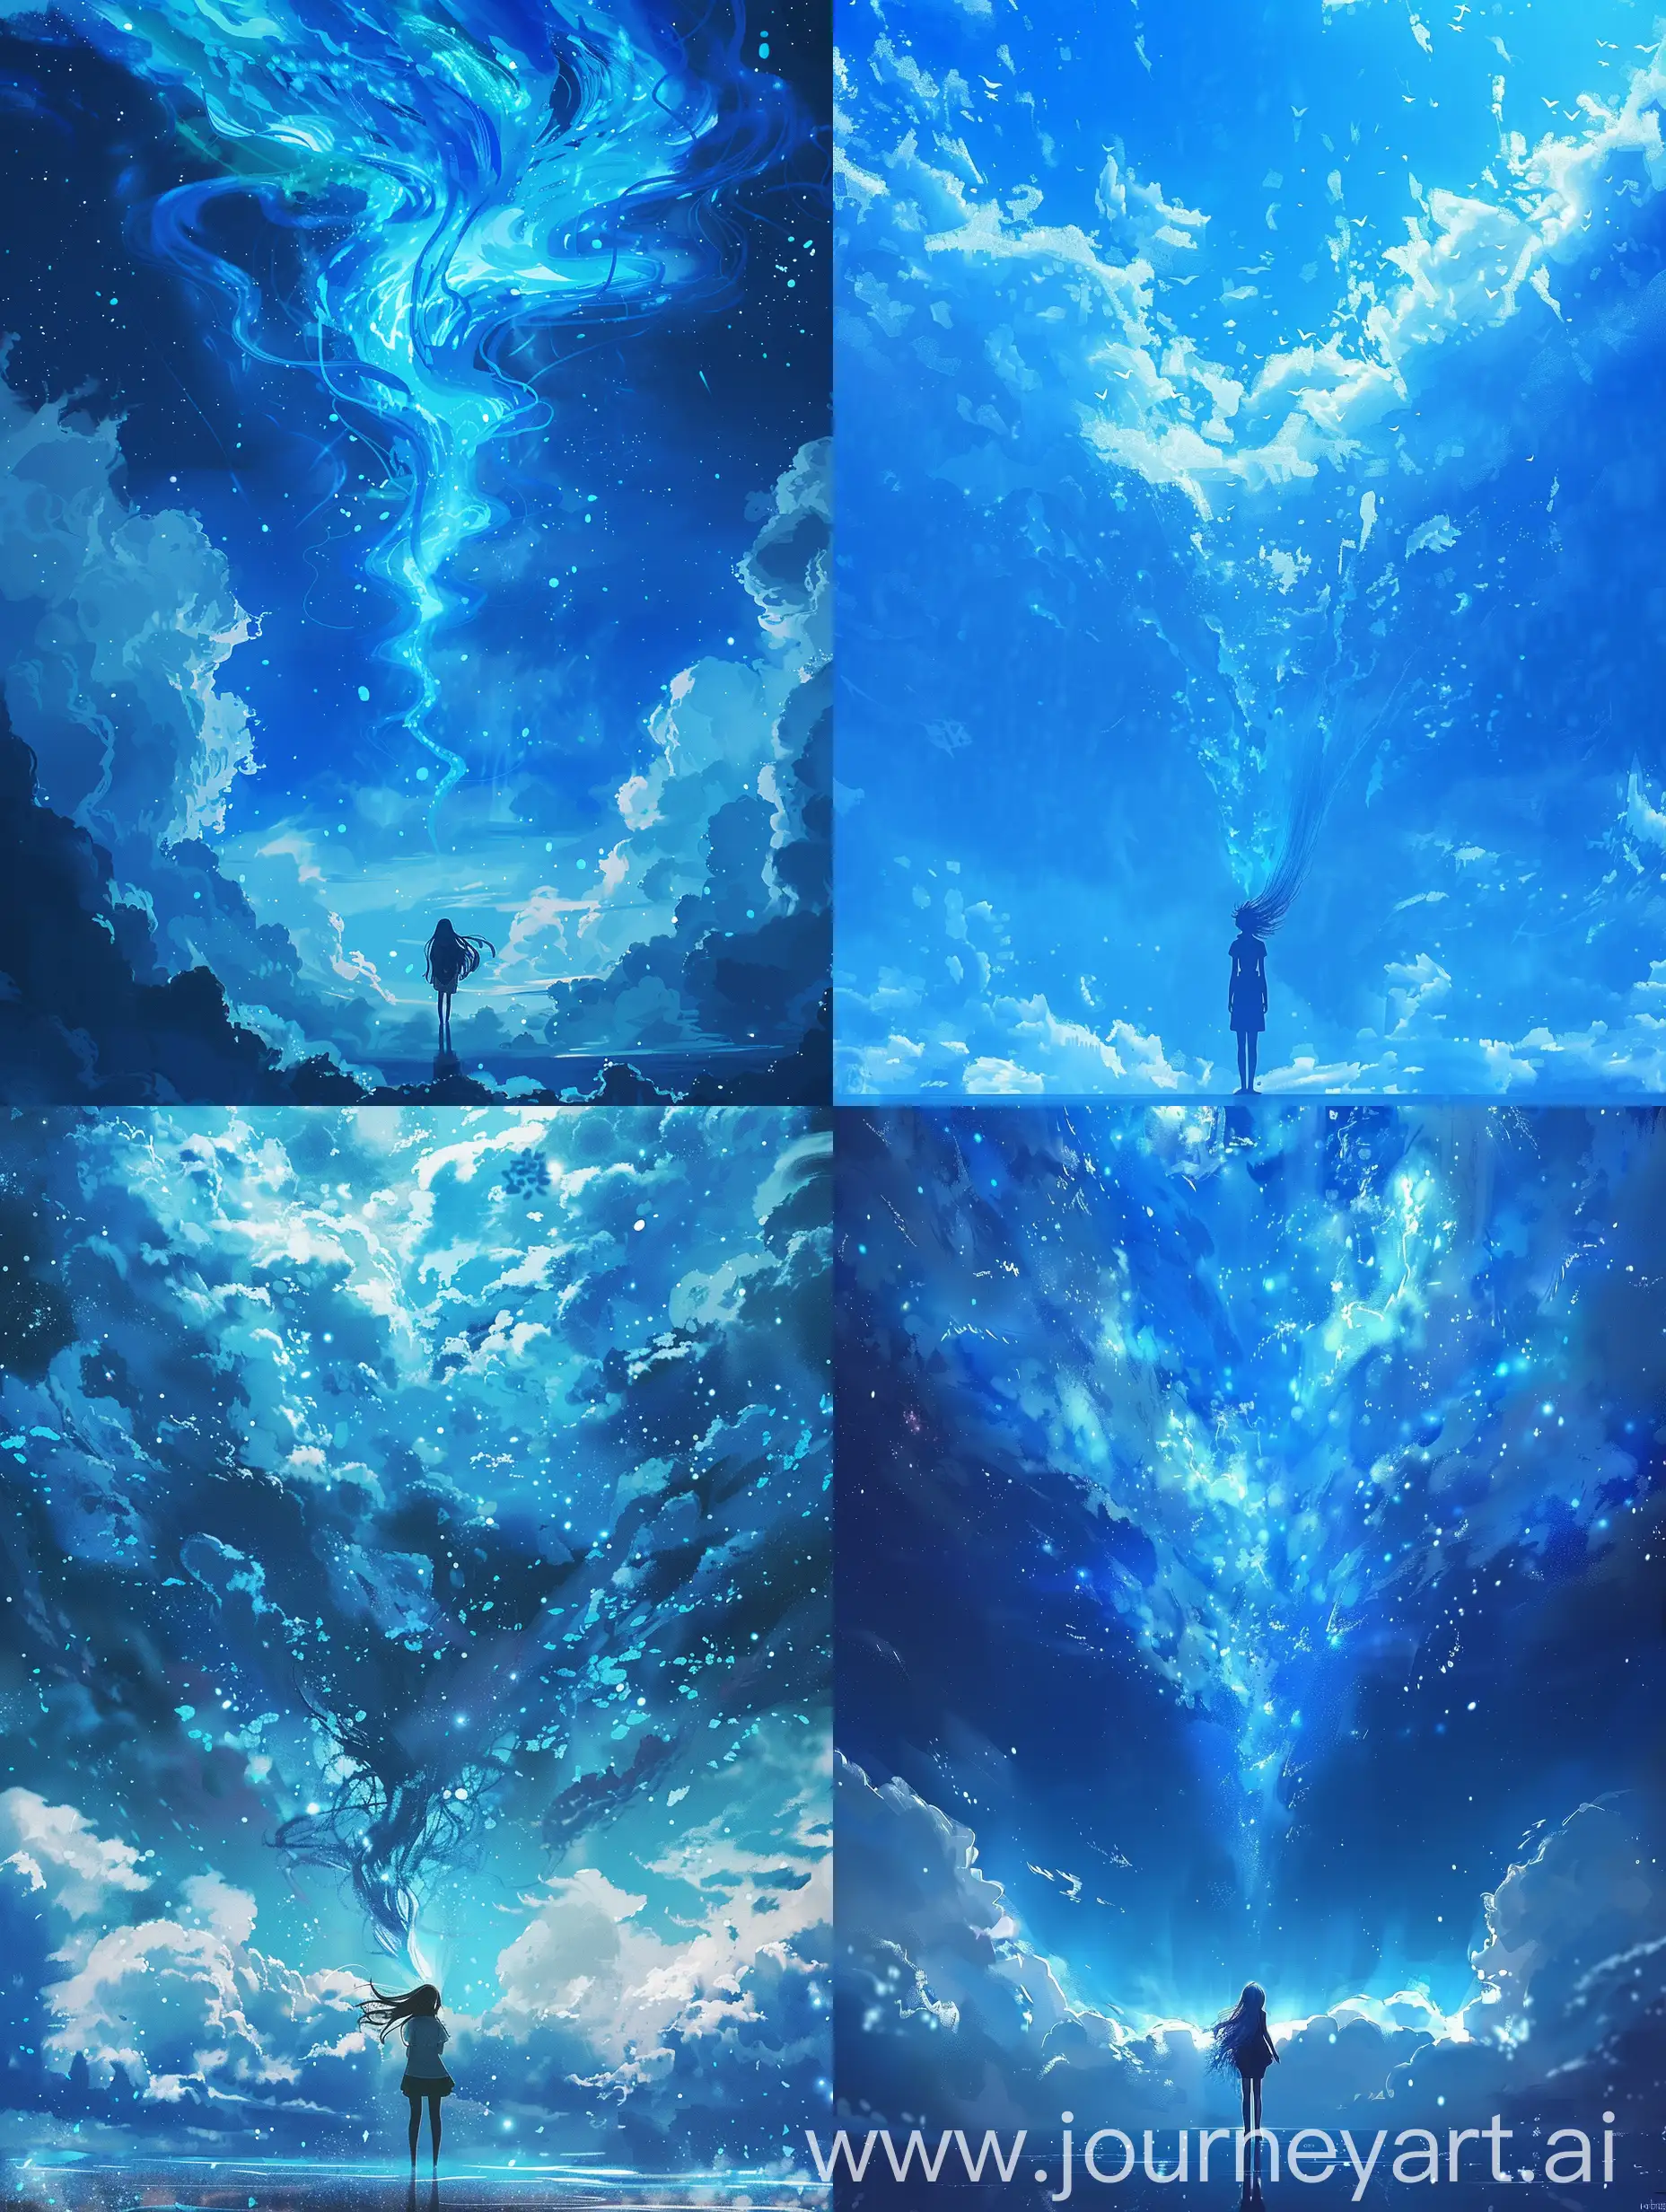 Create a mesmerizing scene where a character stands beneath a fantasy blue sky, their hair dissolving into the heavens above, blending seamlessly with the clouds. Make it an anime-inspired image that feels both magical and realistic."